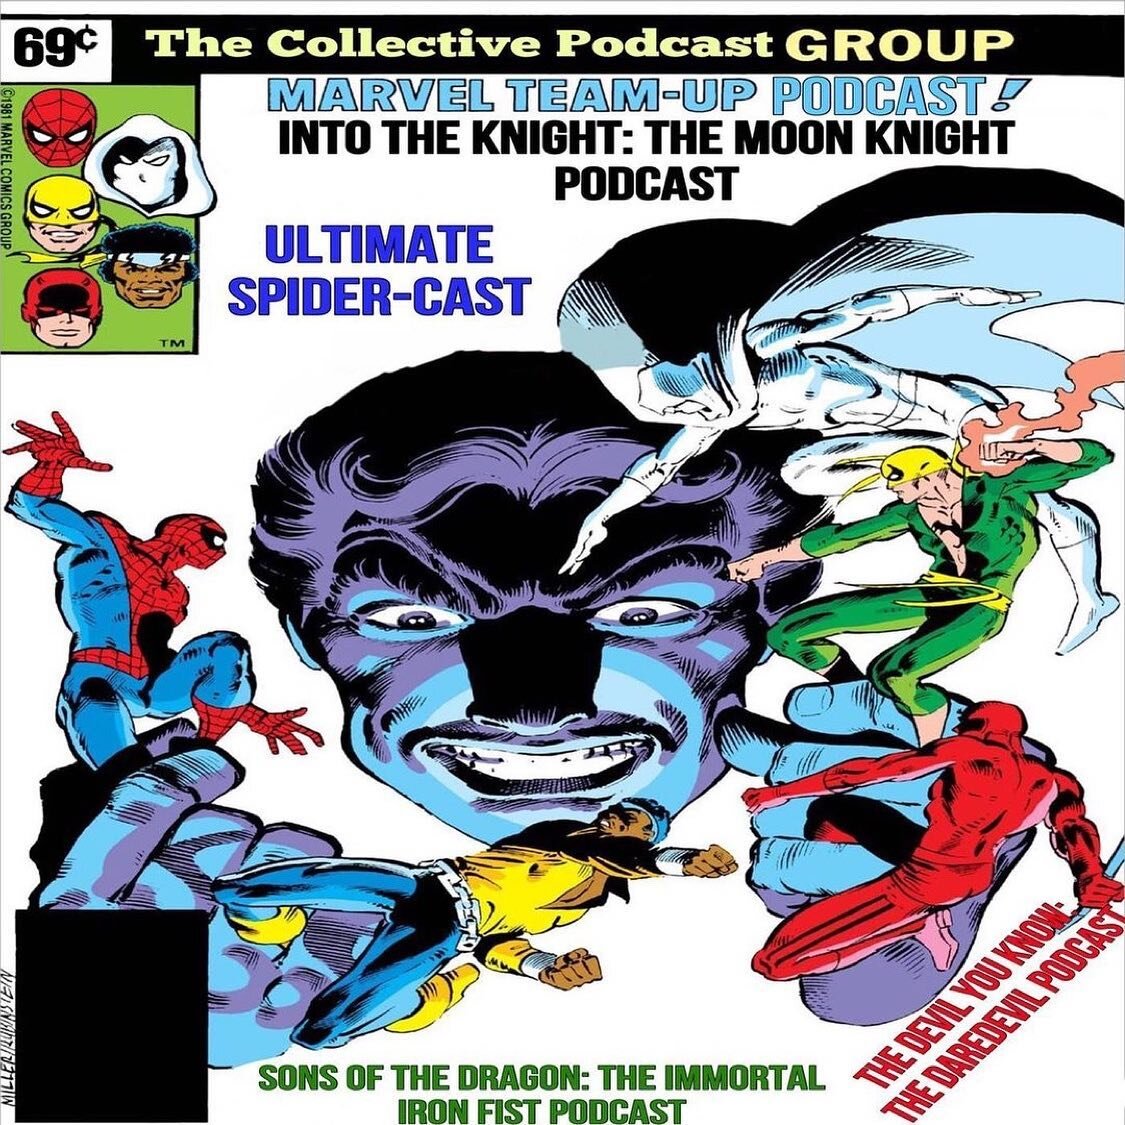 Repost from @capesandlunaticsmarvel
&bull;
Ultimate Spider-Cast/The Devil You Know #podcast Crossover! @nightwingpdp @lilithhellfire86 @itkmoonknight and @connormckenna111 review #marvelteamup annual #4 featuring #spiderman #daredevil #moonknight #lu